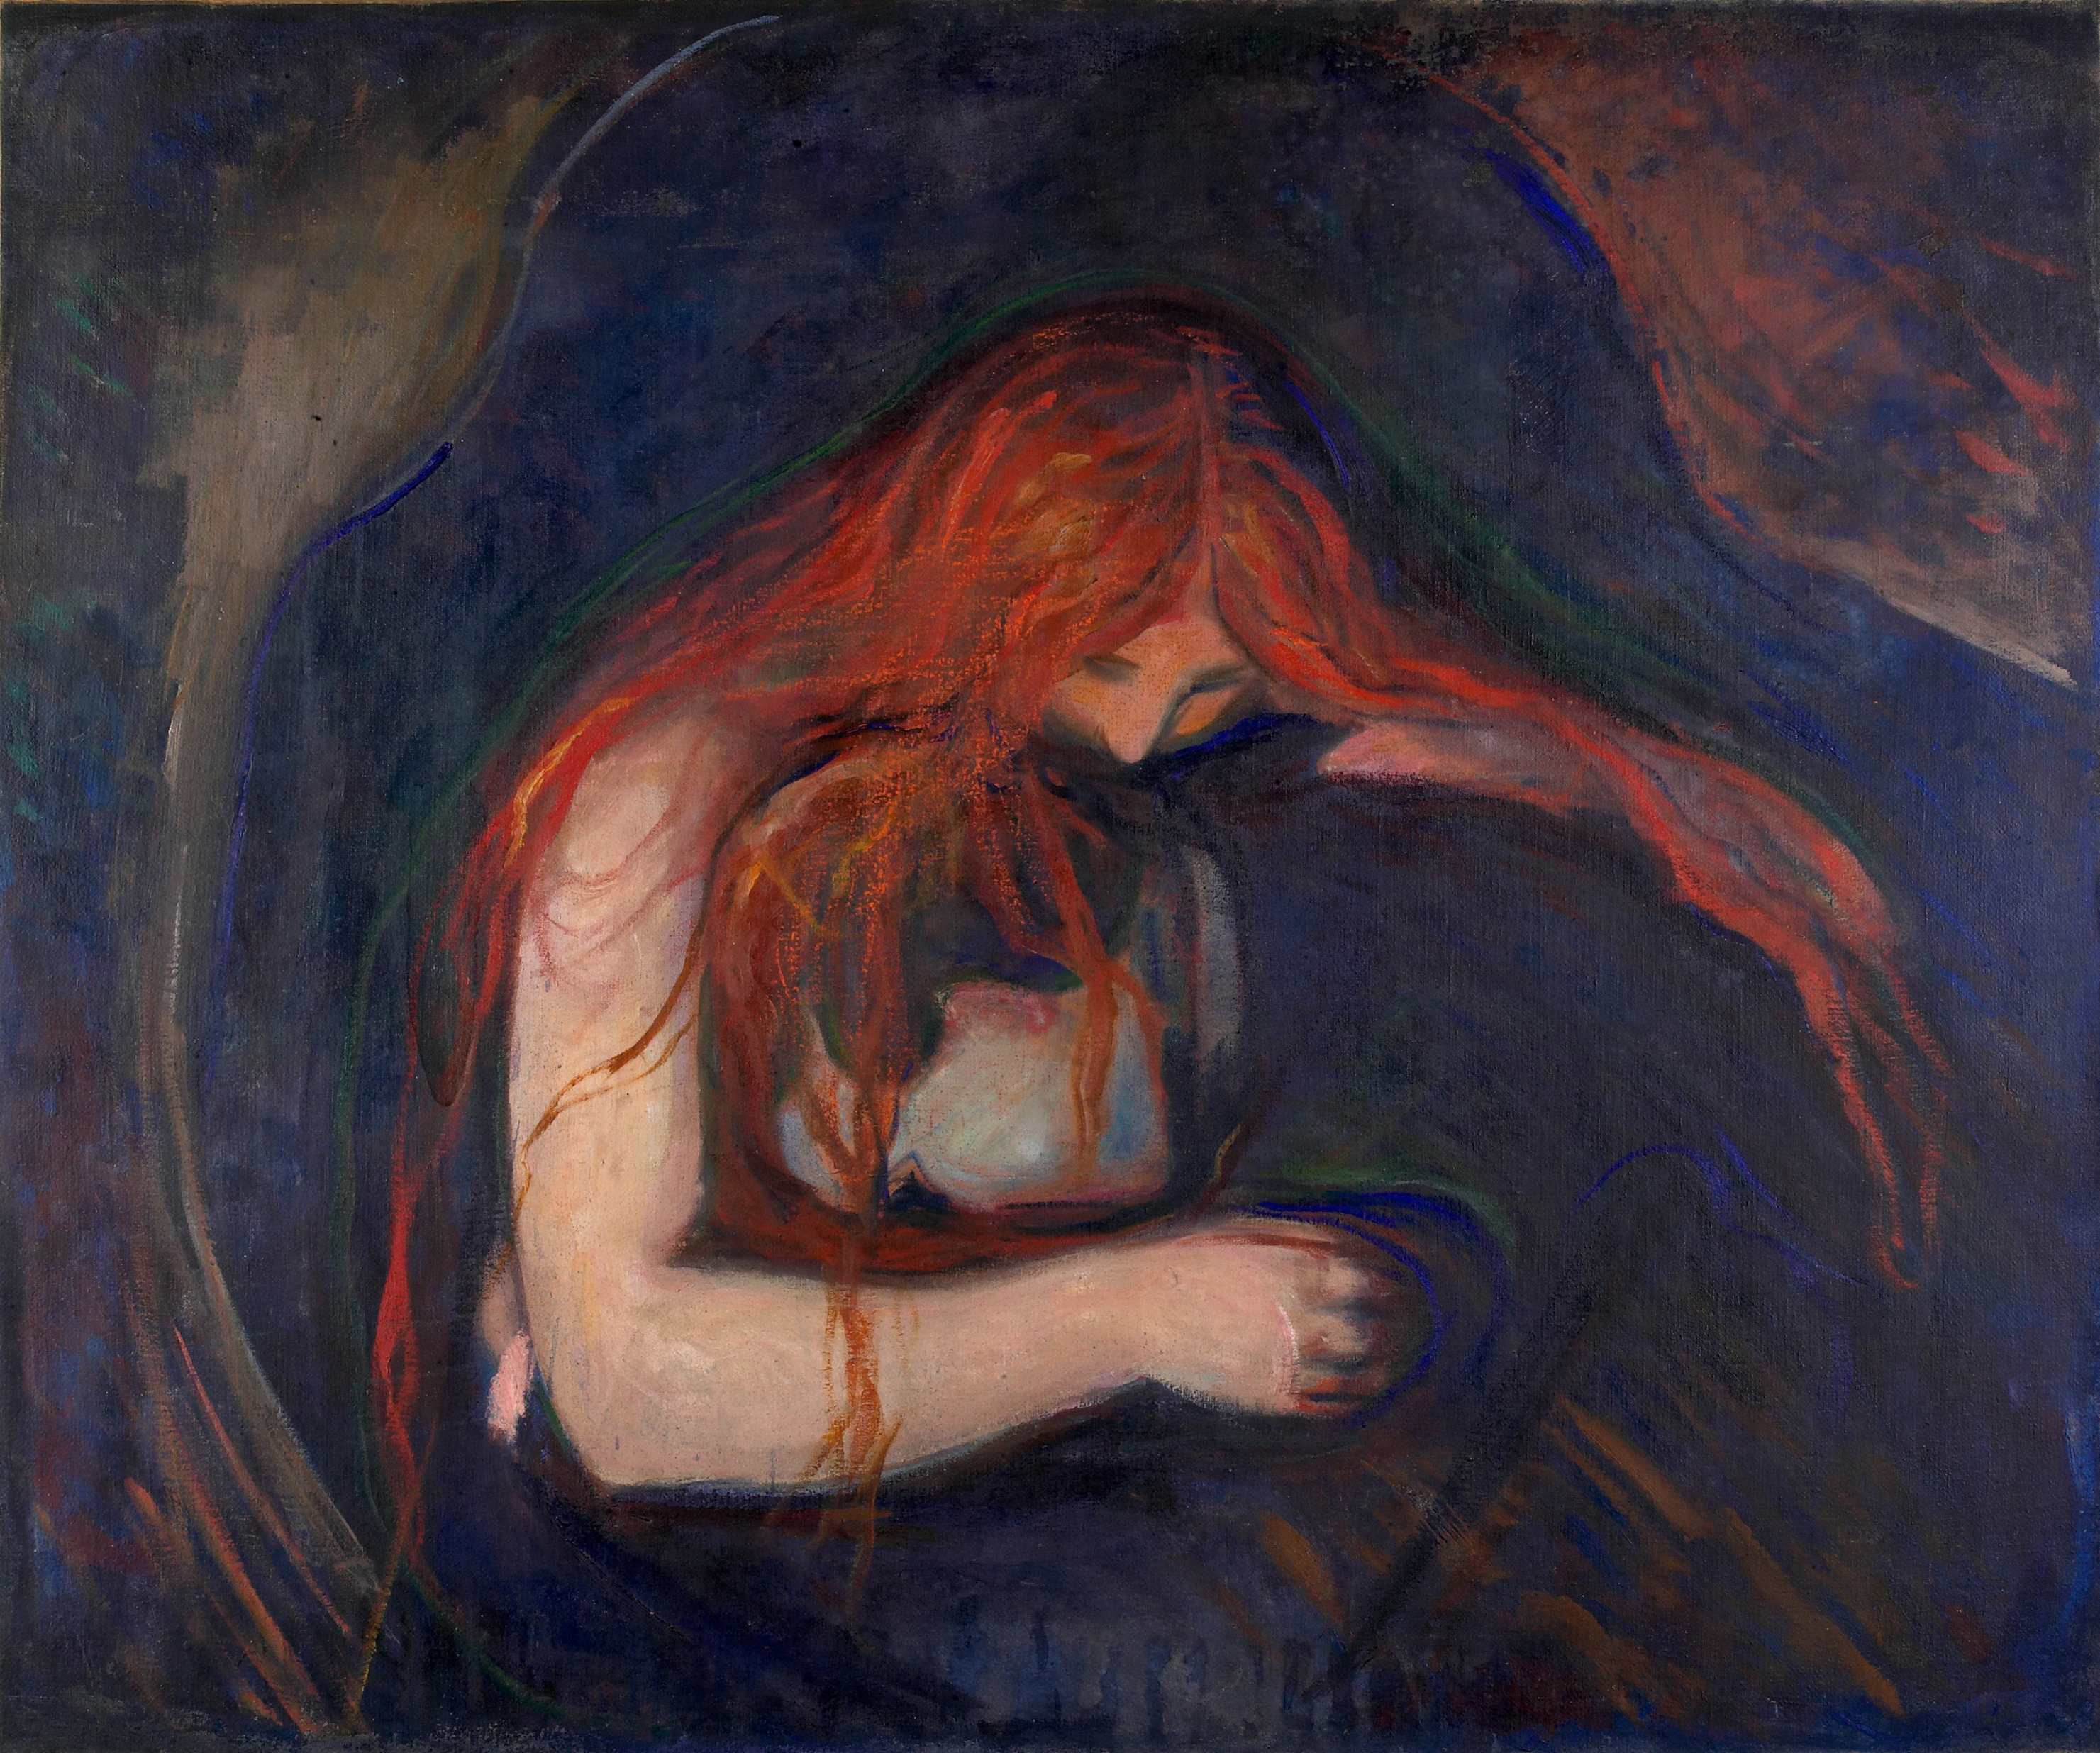 A man buries his head in a woman’s lap. She embraces him, placing her mouth on the back of his neck. Her blood-red hair is draped around the man’s body. The room around them is dark. 